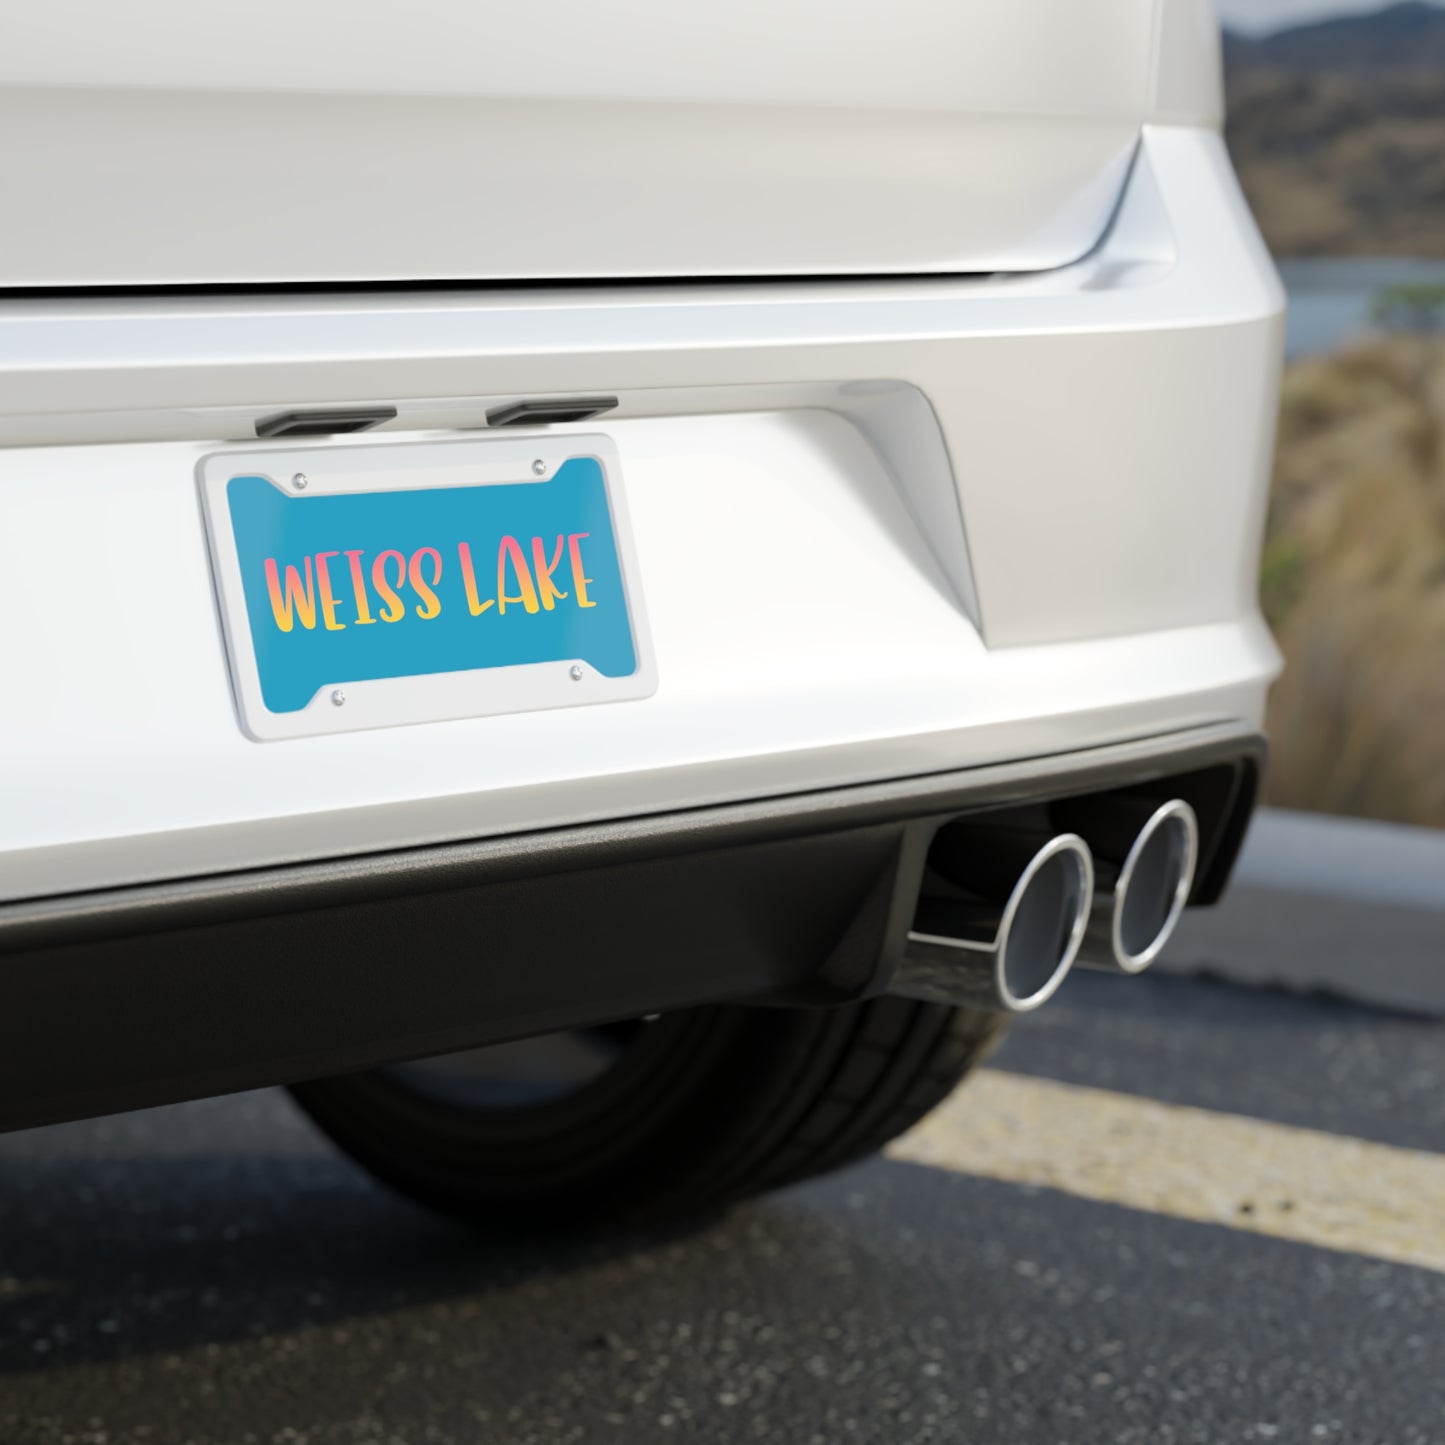 Weiss Lake License Plate